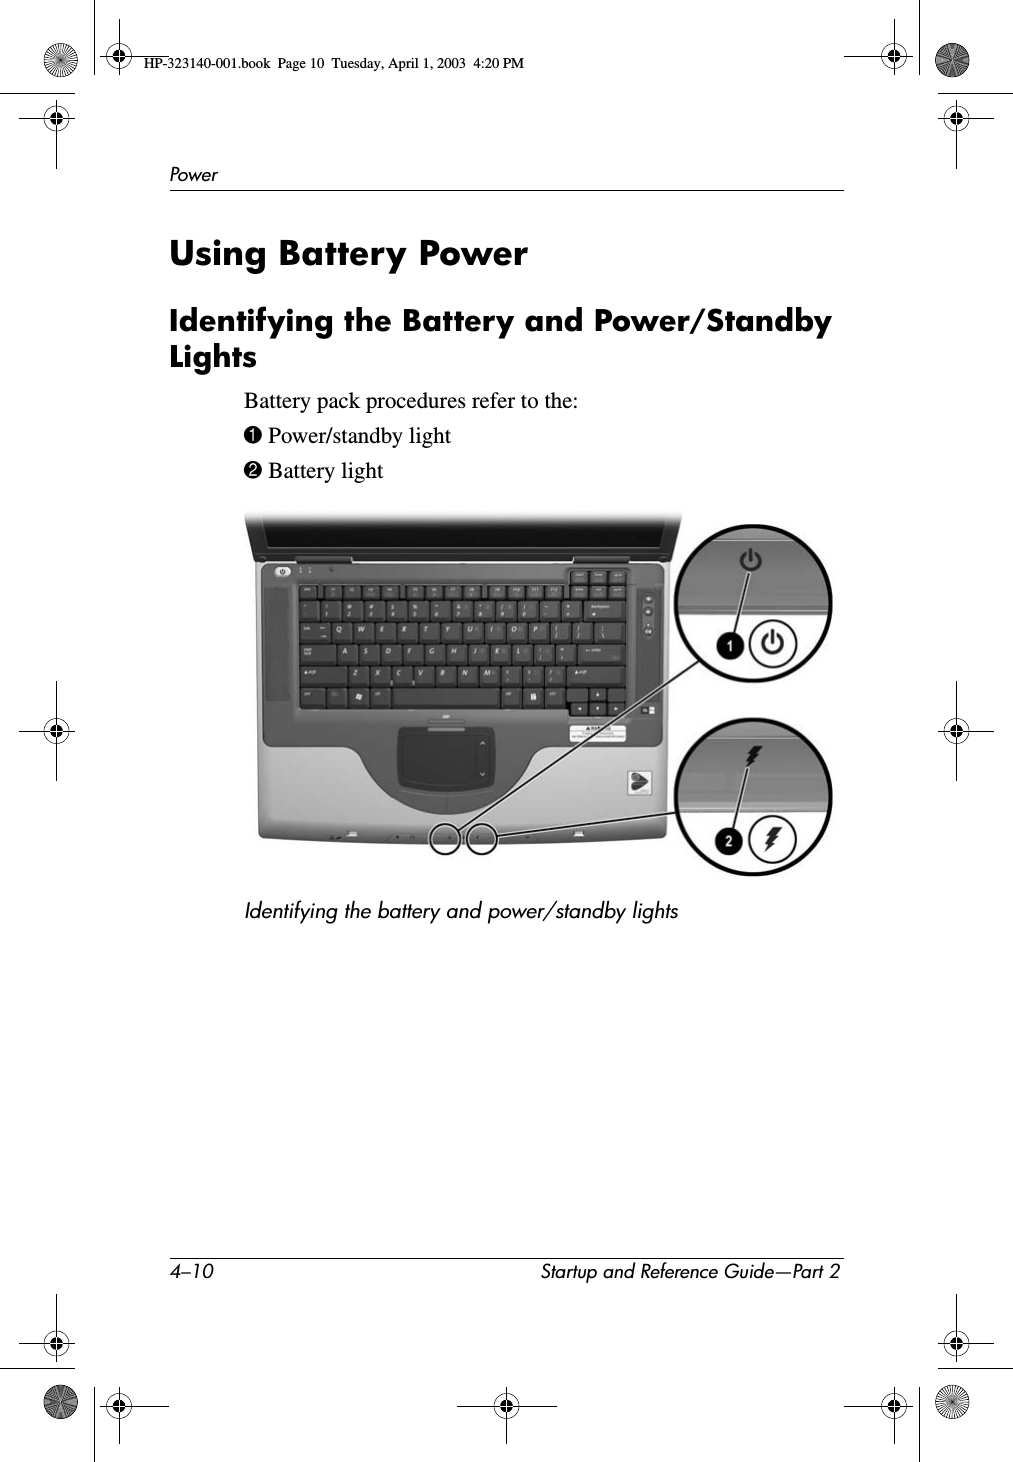 4–10 Startup and Reference Guide—Part 2PowerUsing Battery PowerIdentifying the Battery and Power/Standby LightsBattery pack procedures refer to the:1 Power/standby light2 Battery lightIdentifying the battery and power/standby lightsHP-323140-001.book  Page 10  Tuesday, April 1, 2003  4:20 PM